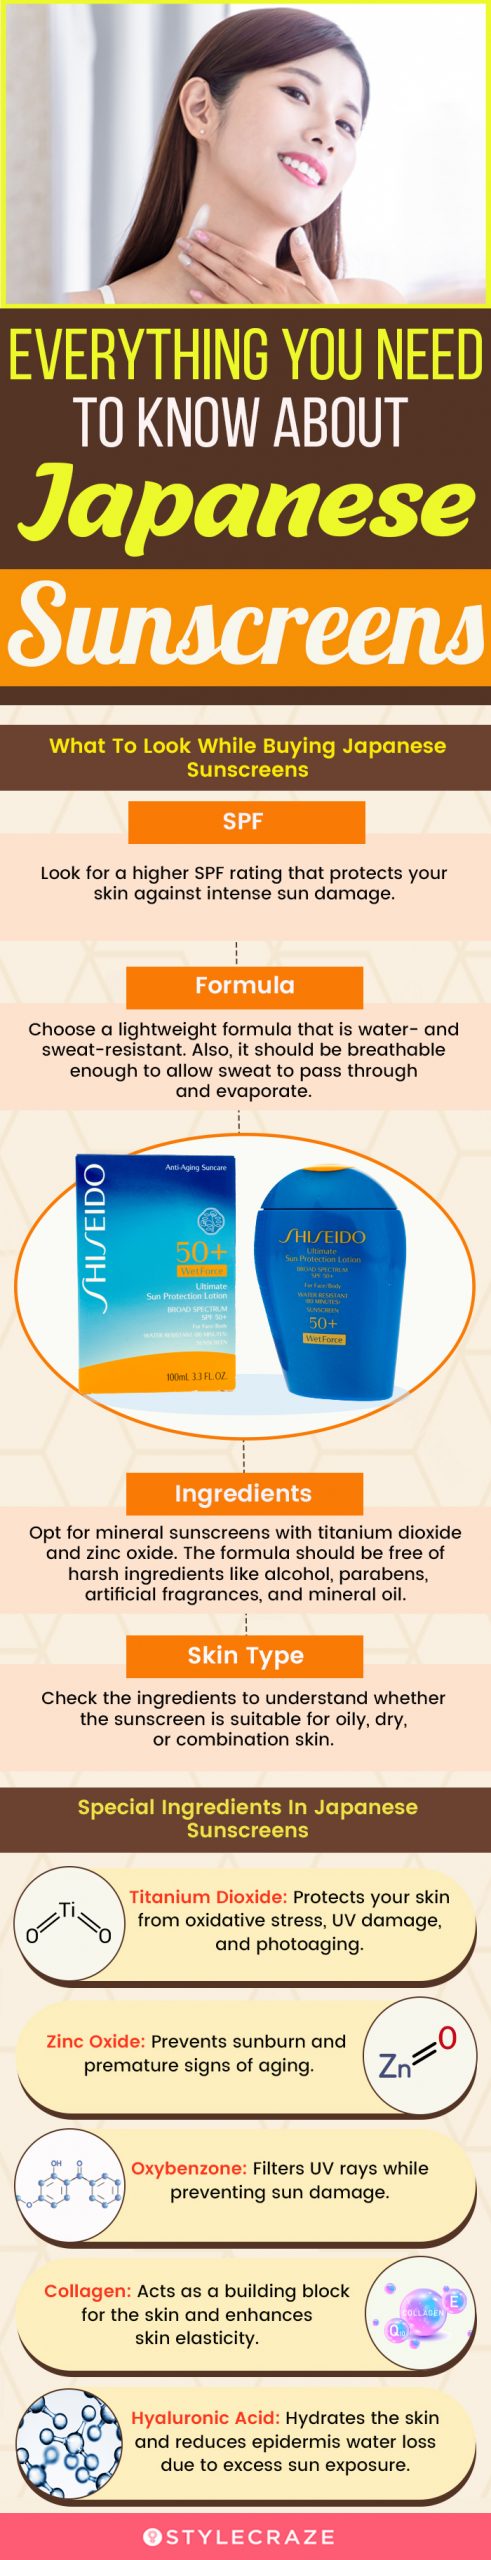 Everything You Need To Know About Japanese Sunscreens (infographic)